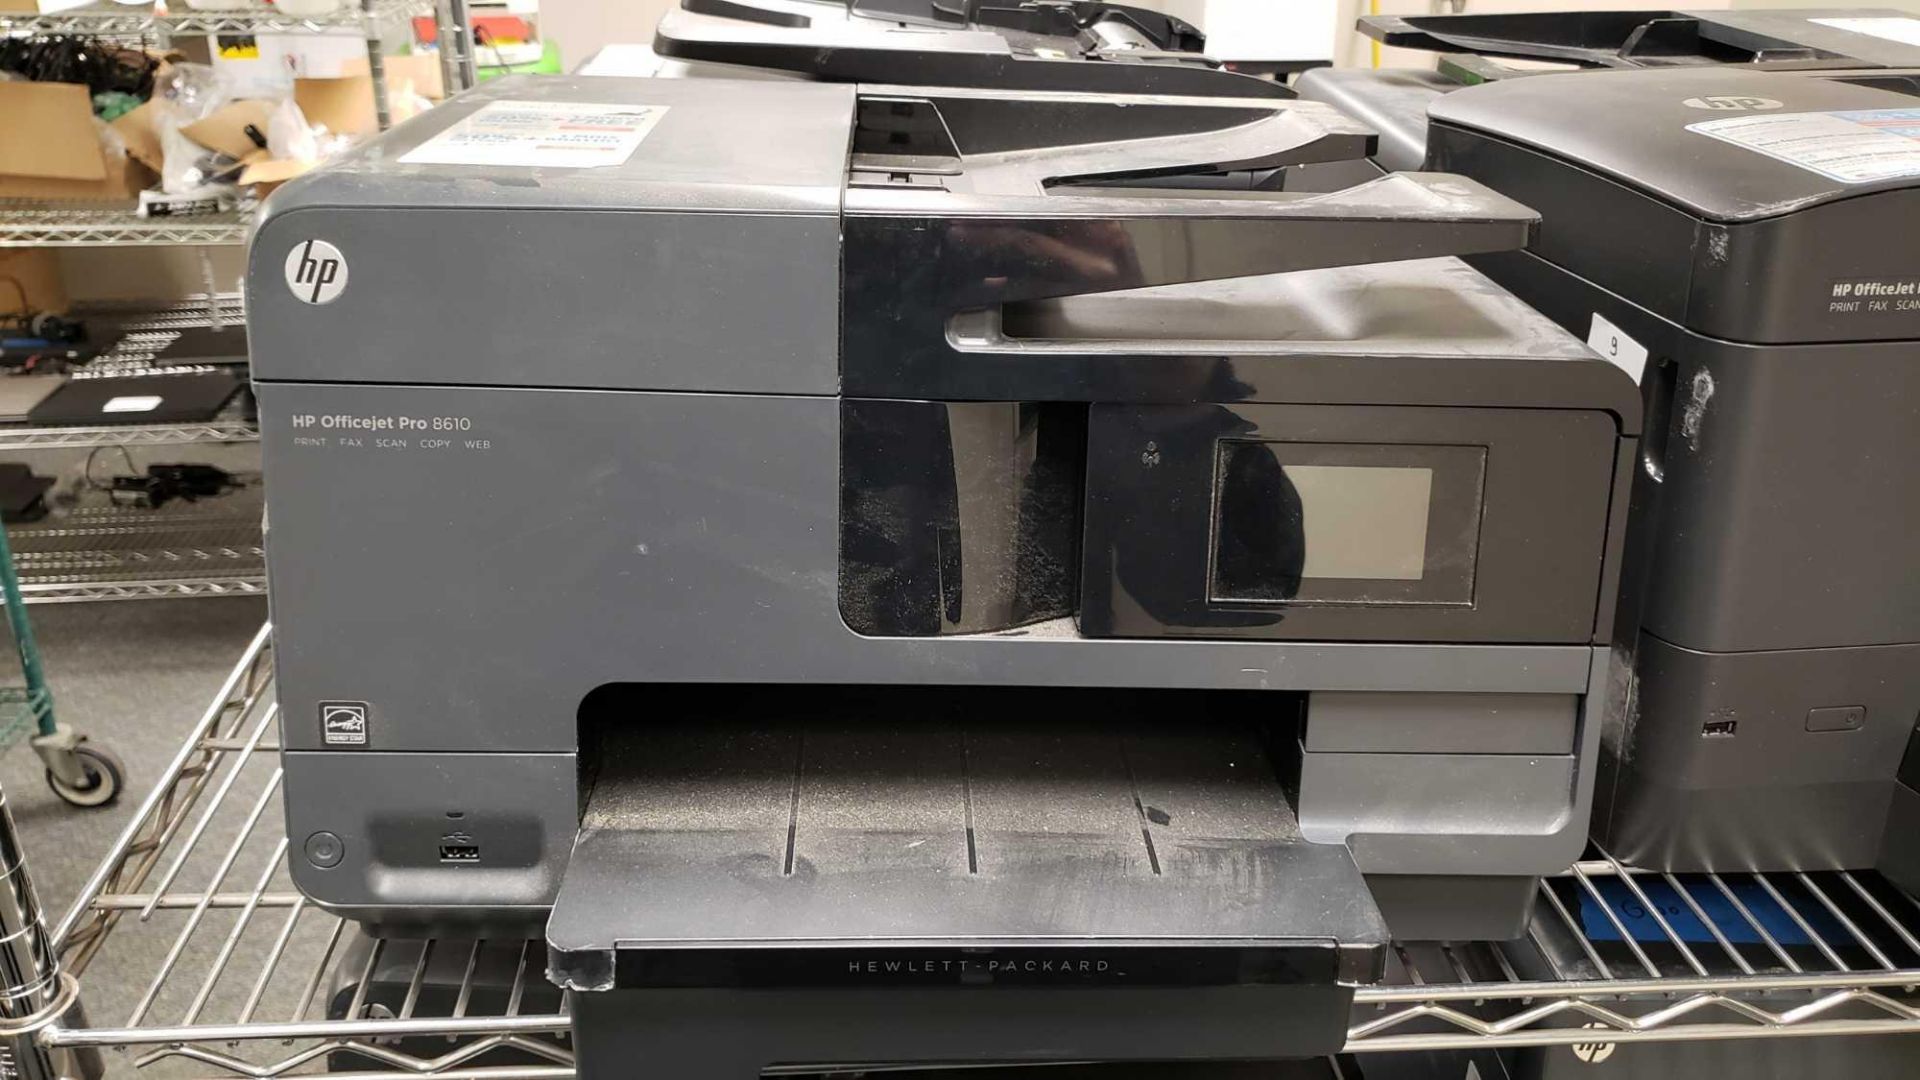 Lot of (3) HP Printers to include (2) HP Officejet Pro 8610 and (1) HP Officejet Pro 8710 - Image 4 of 4